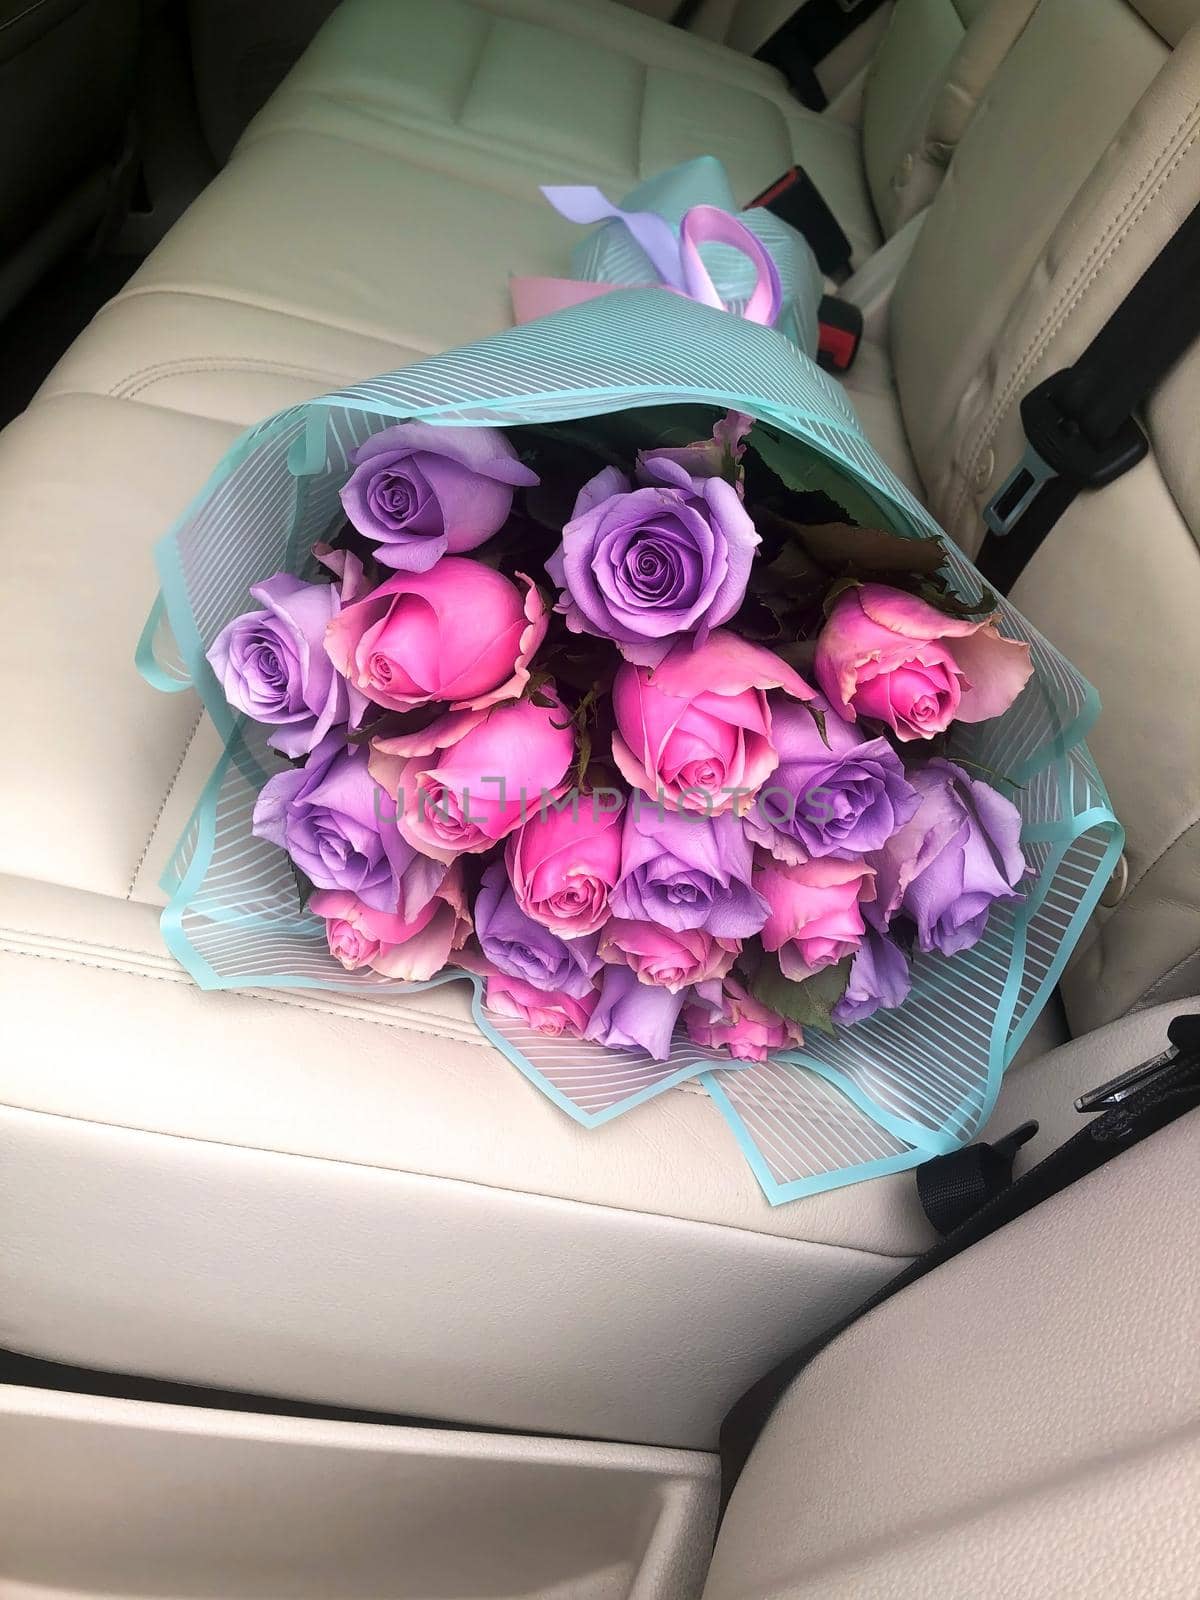 a bouquet of flowers lies on the light leather back seat of the car. Many lilac and pink roses are collected in a bouquet. Flowers wrapped in gift paper. Gift concept for girlfriend.